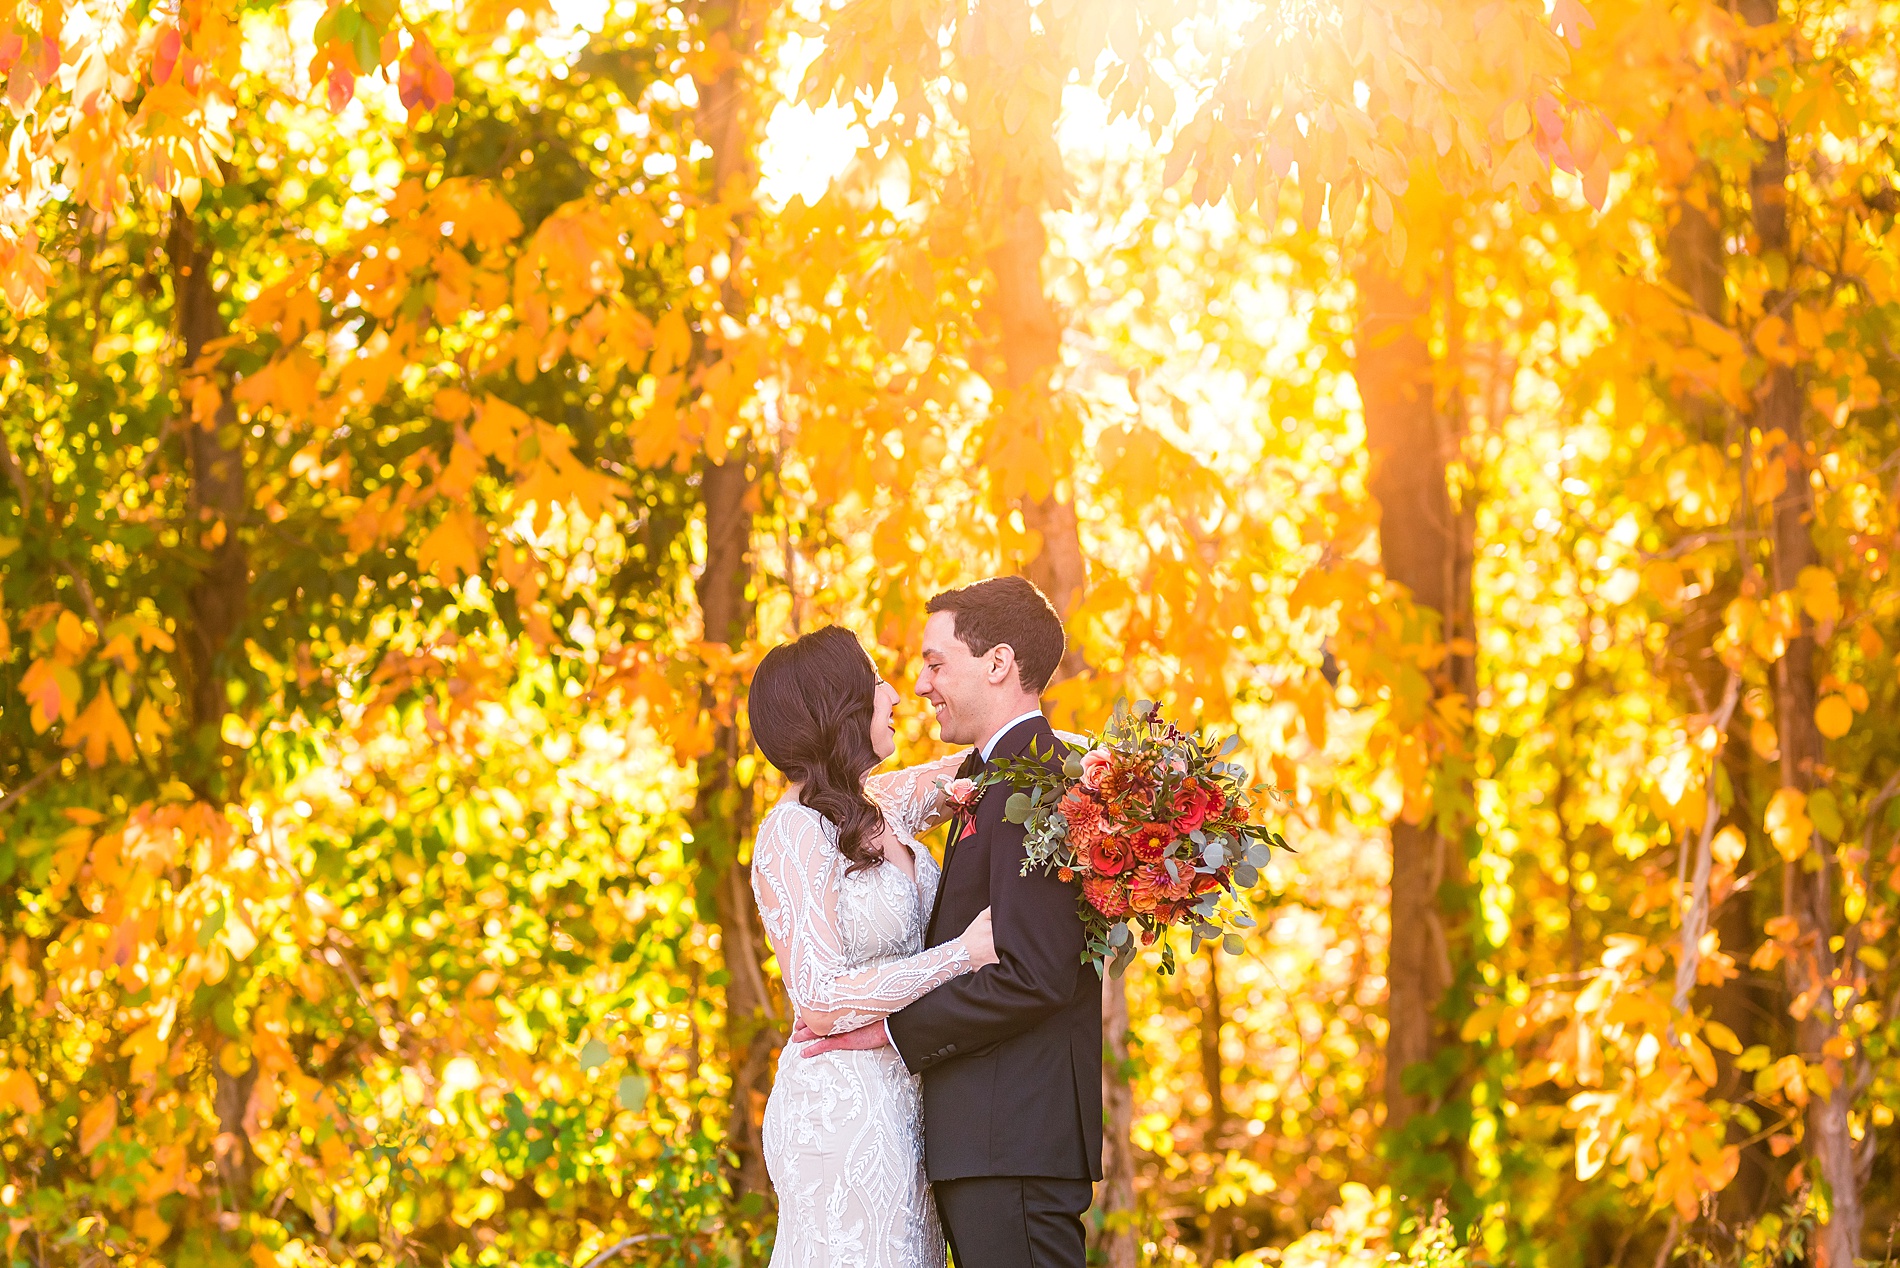 Bride + Groom portraits with fall foliage and sunlight streaming in through the trees